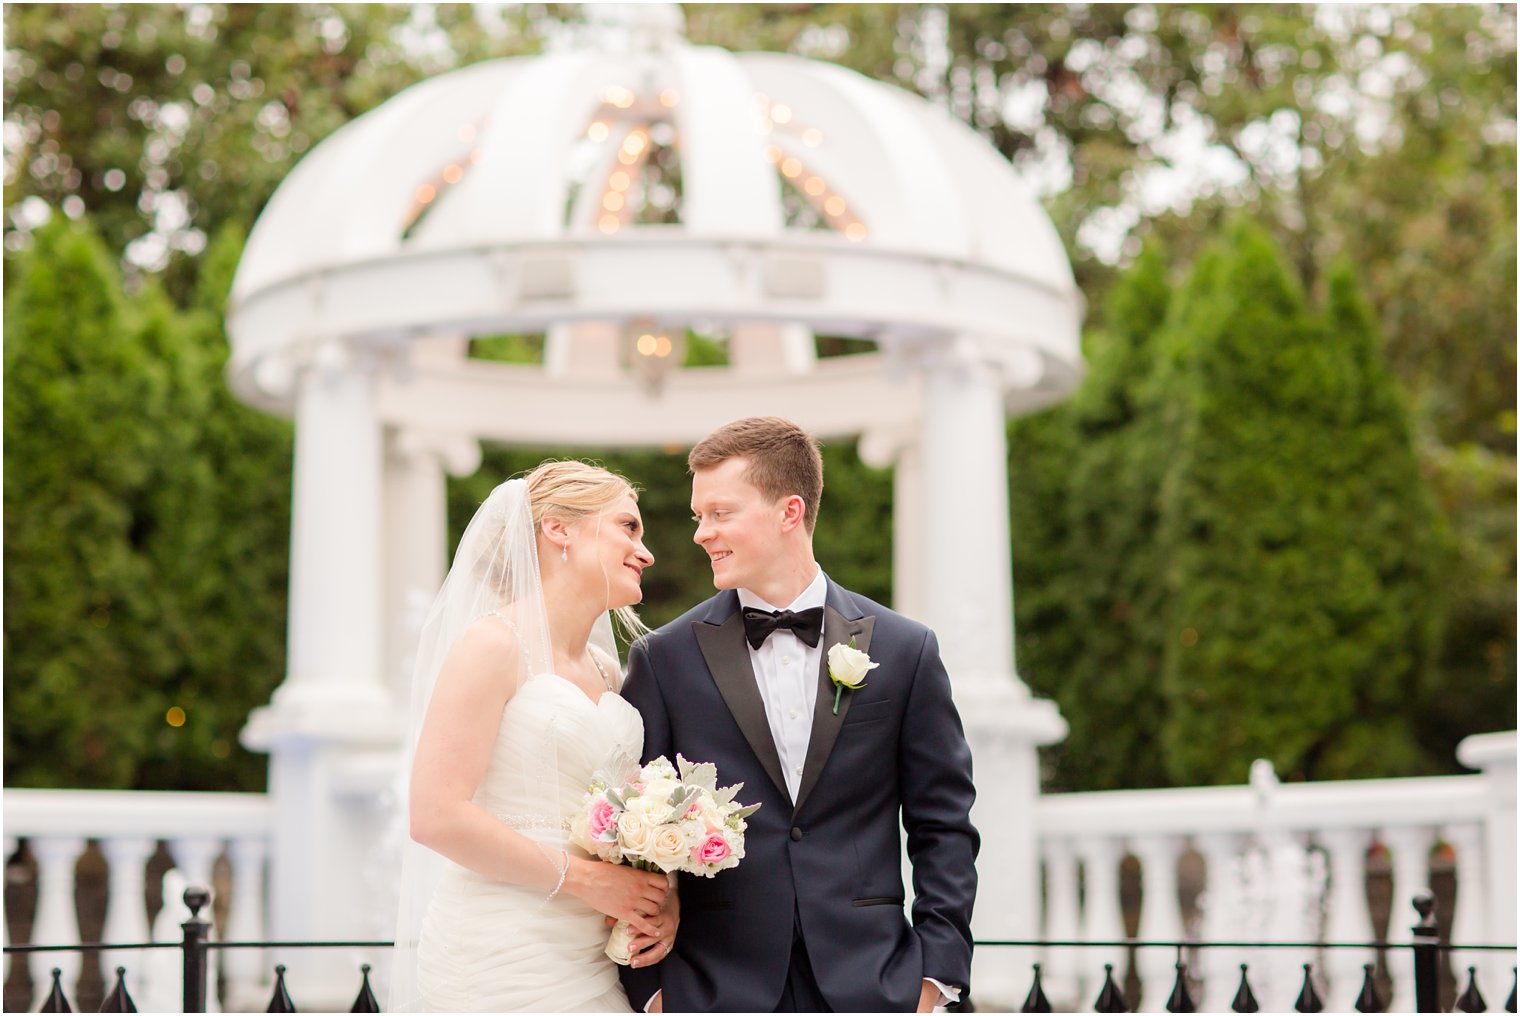 Portraits of bride and groom | Westmount Country Club Wedding Photos